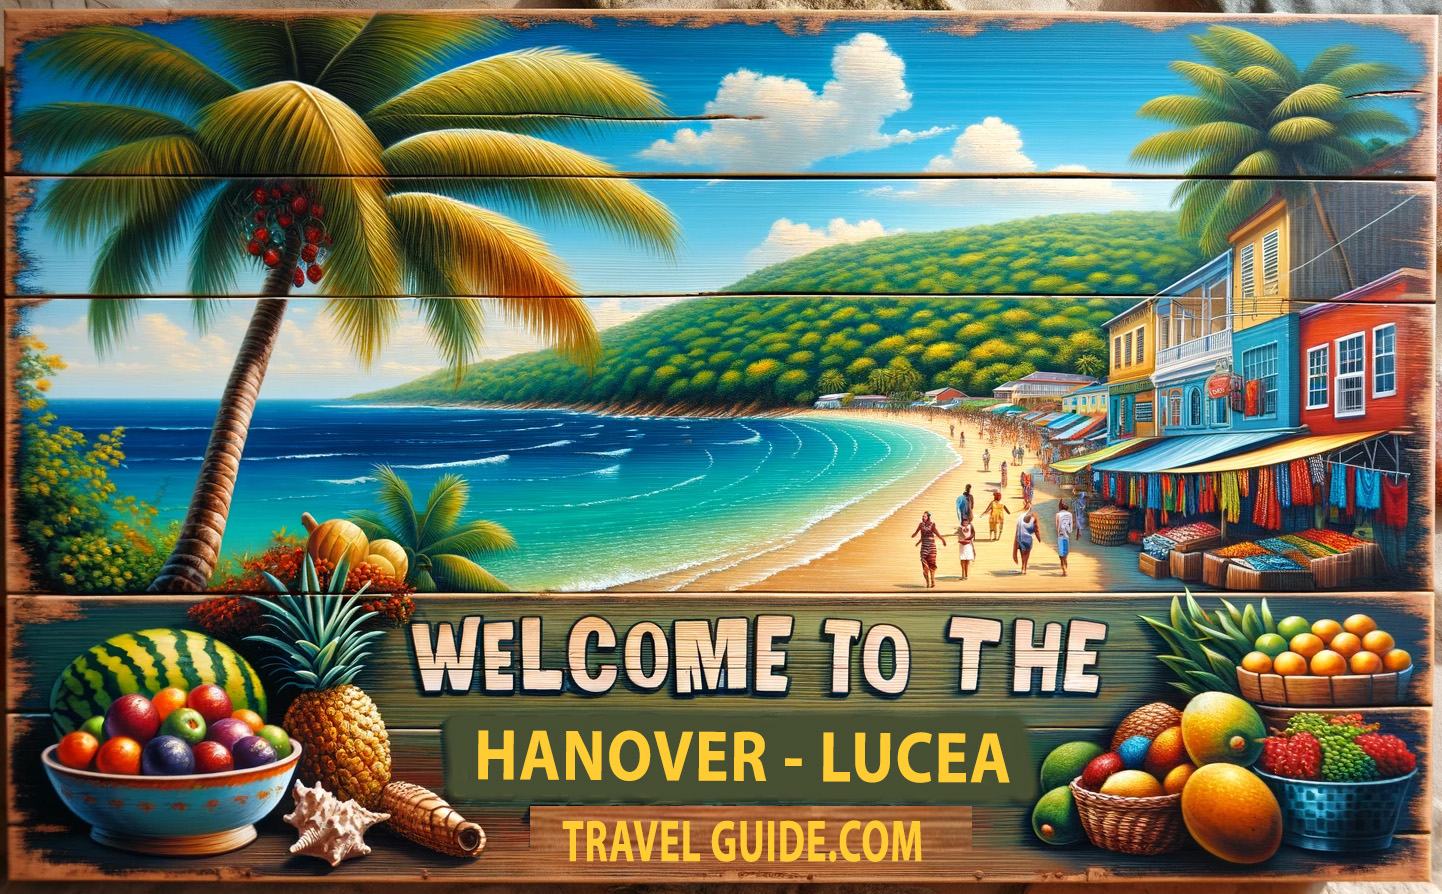 Welcome to Hanover - Lucea Travel Guide